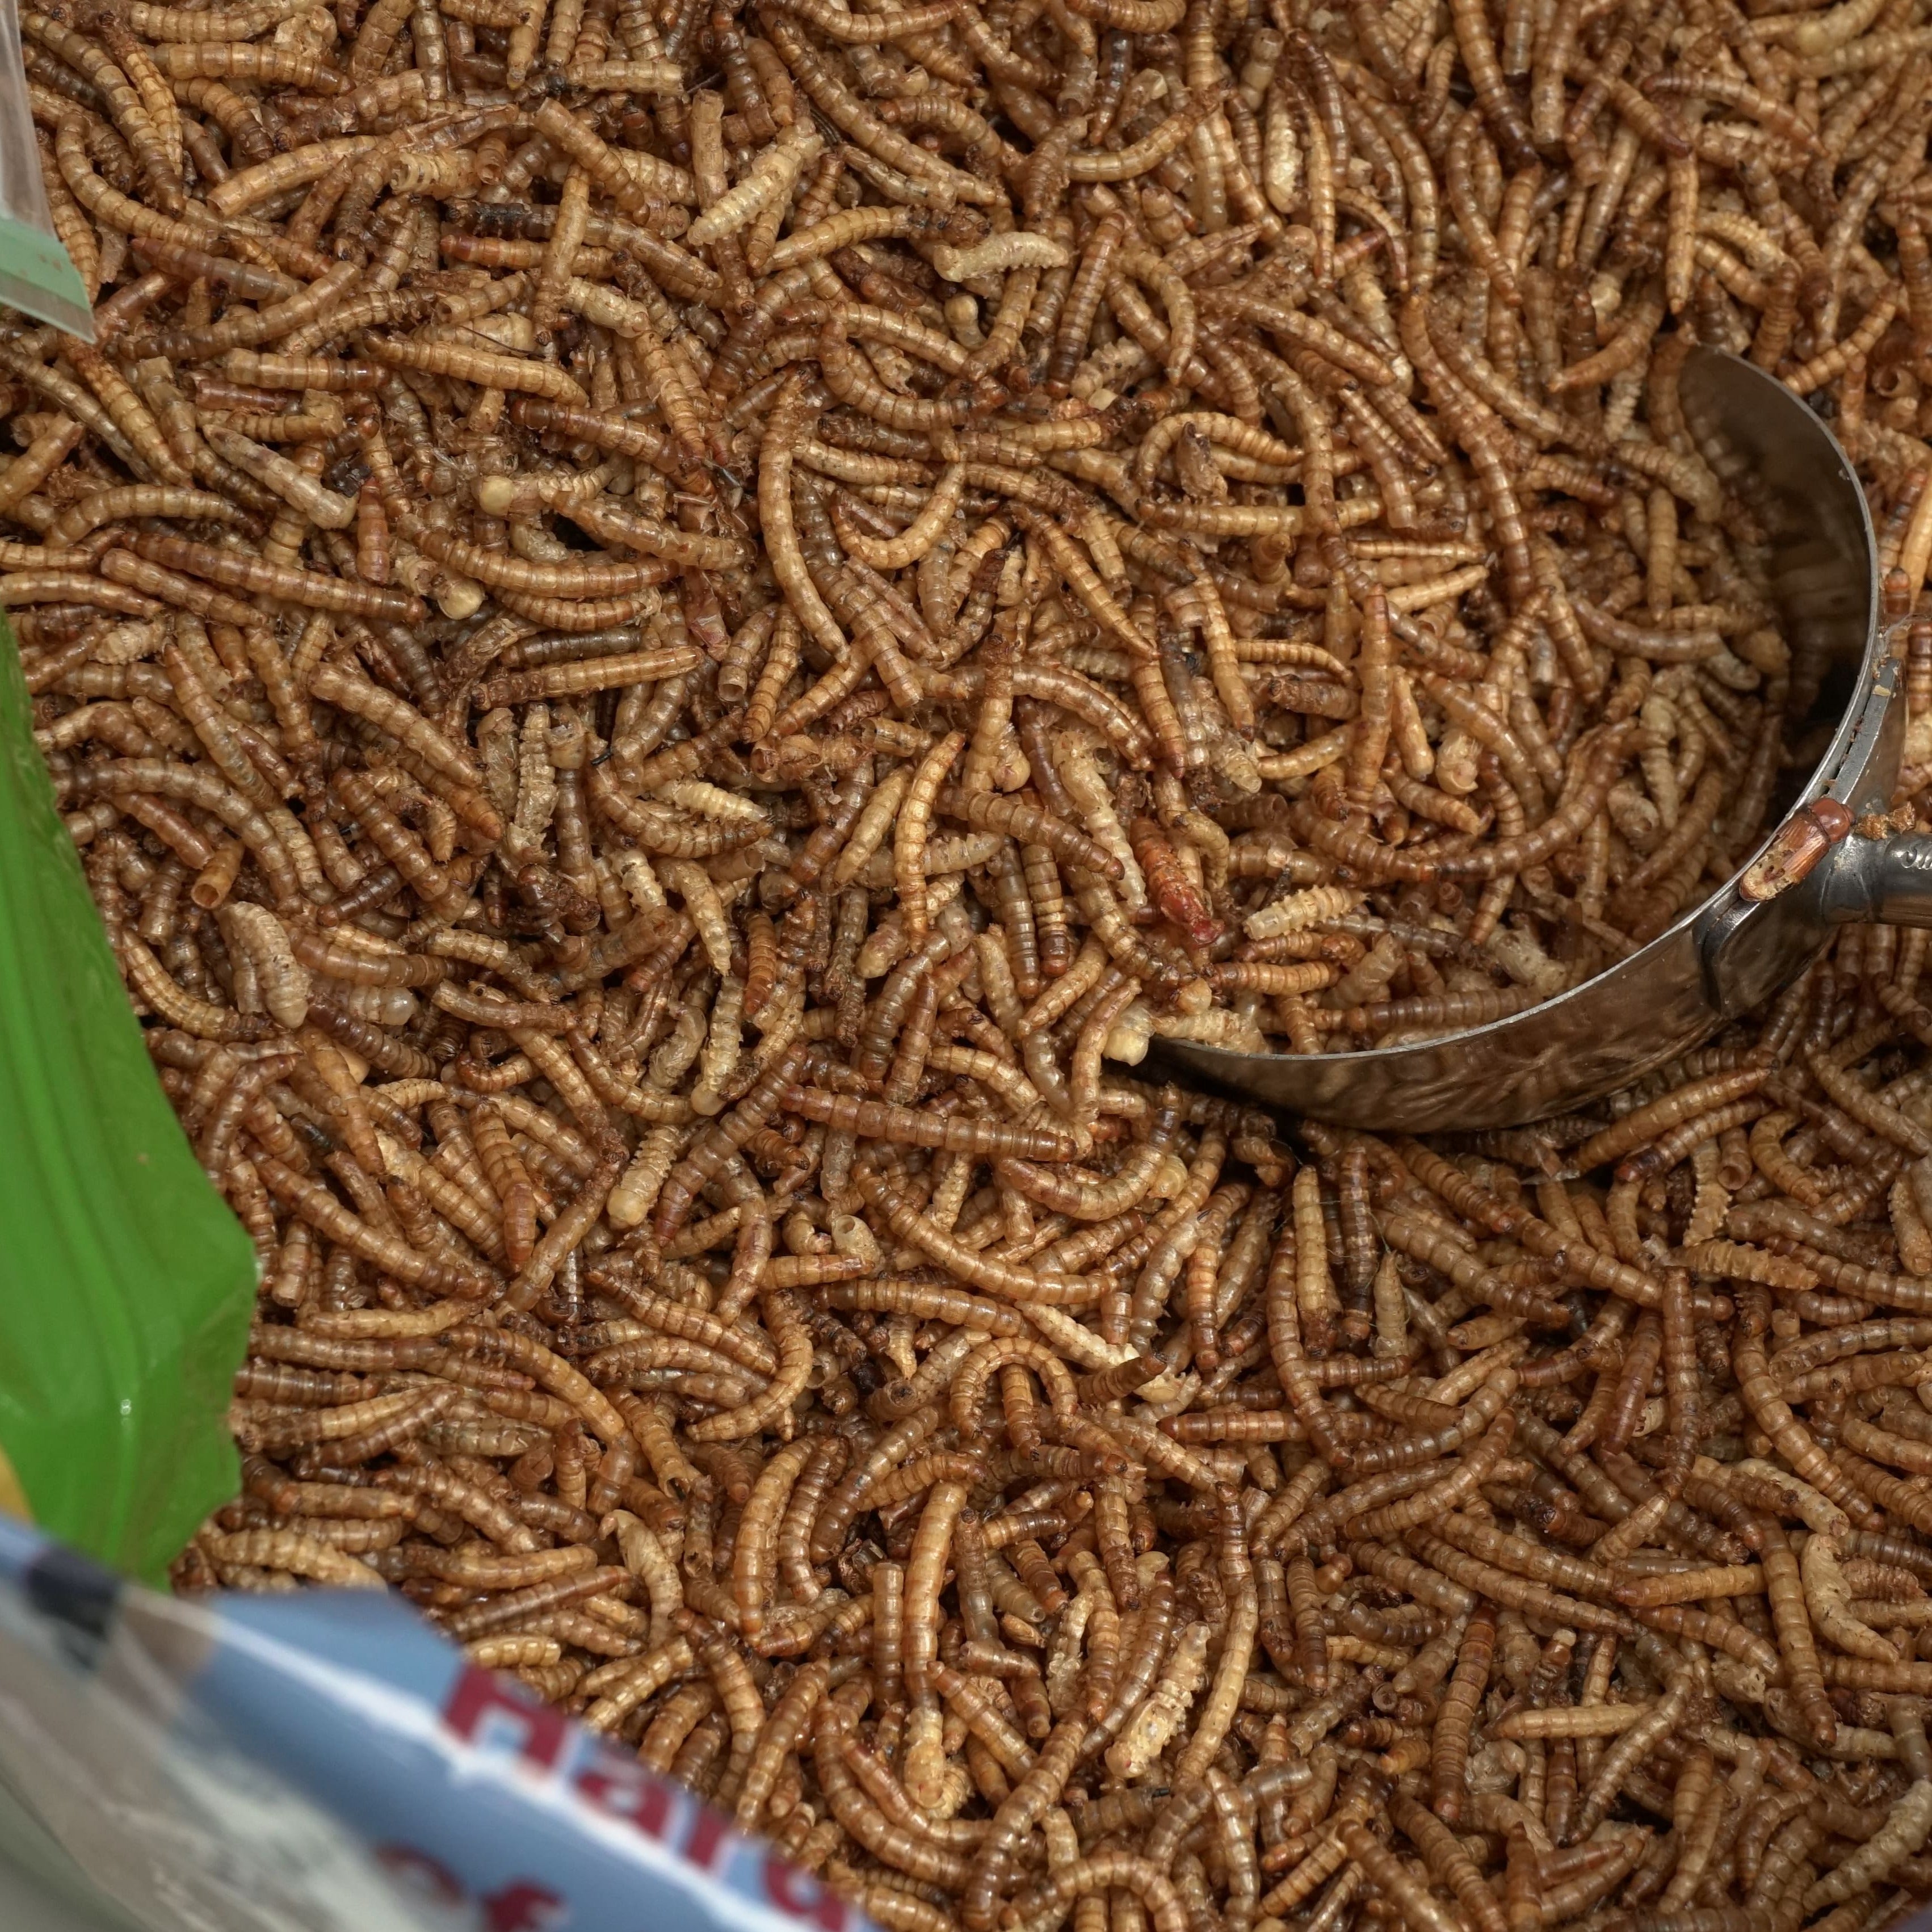 60 lb UCM Dried Mealworms